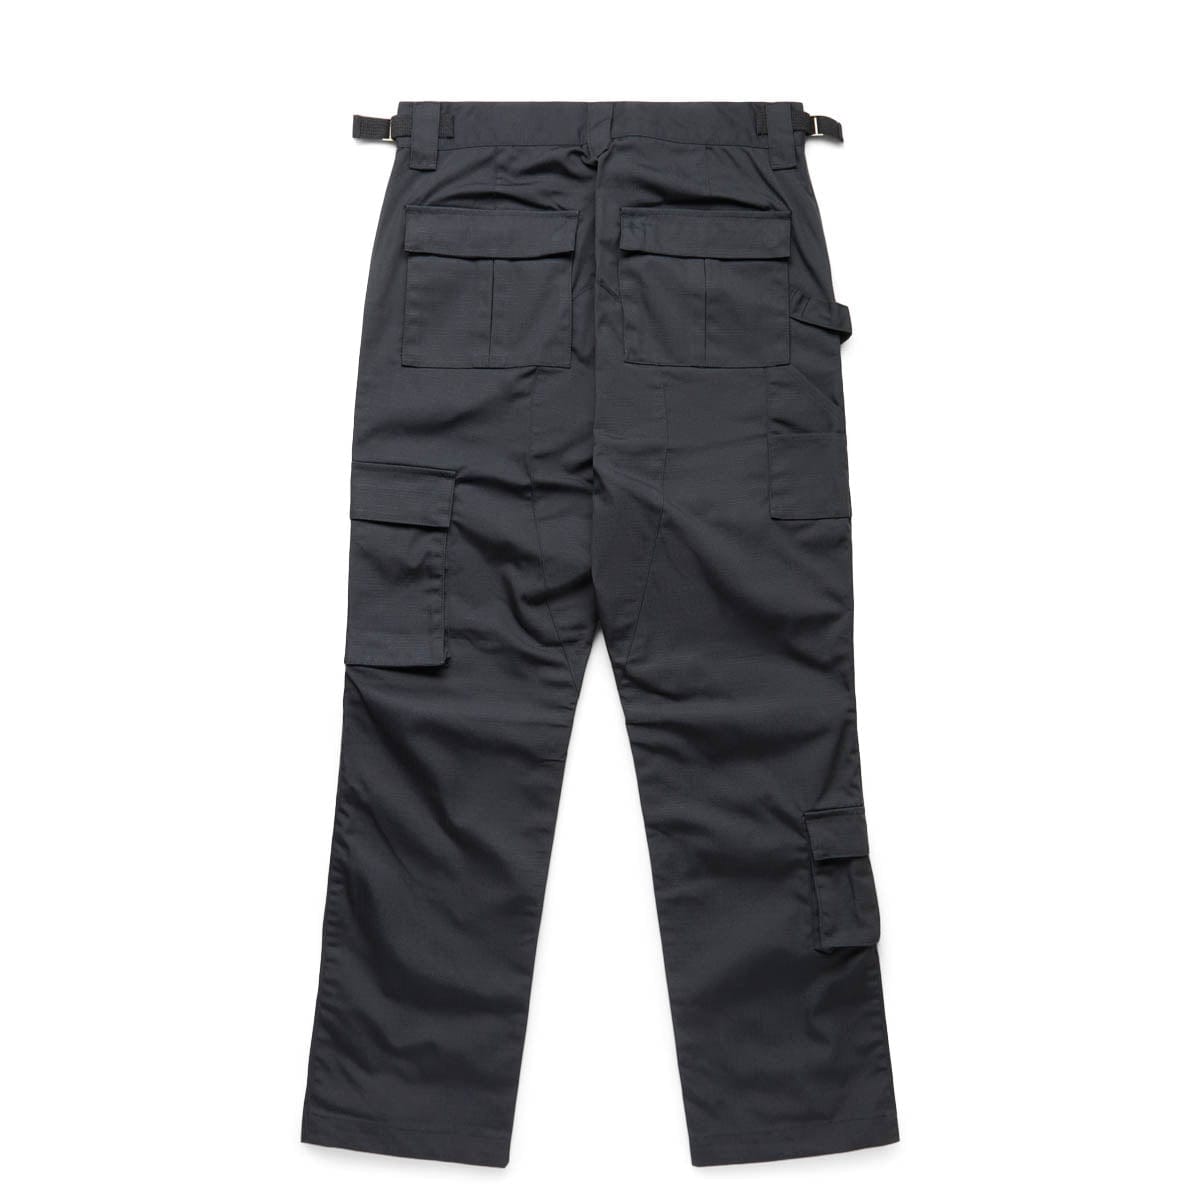 Black Denim Slim Fit Jogger Jeans For Men With Pockets And Straps For Men  Skinny Pencil Pants For Casual Cargo Wear Style 2985 From Loos01, $23.88 |  DHgate.Com